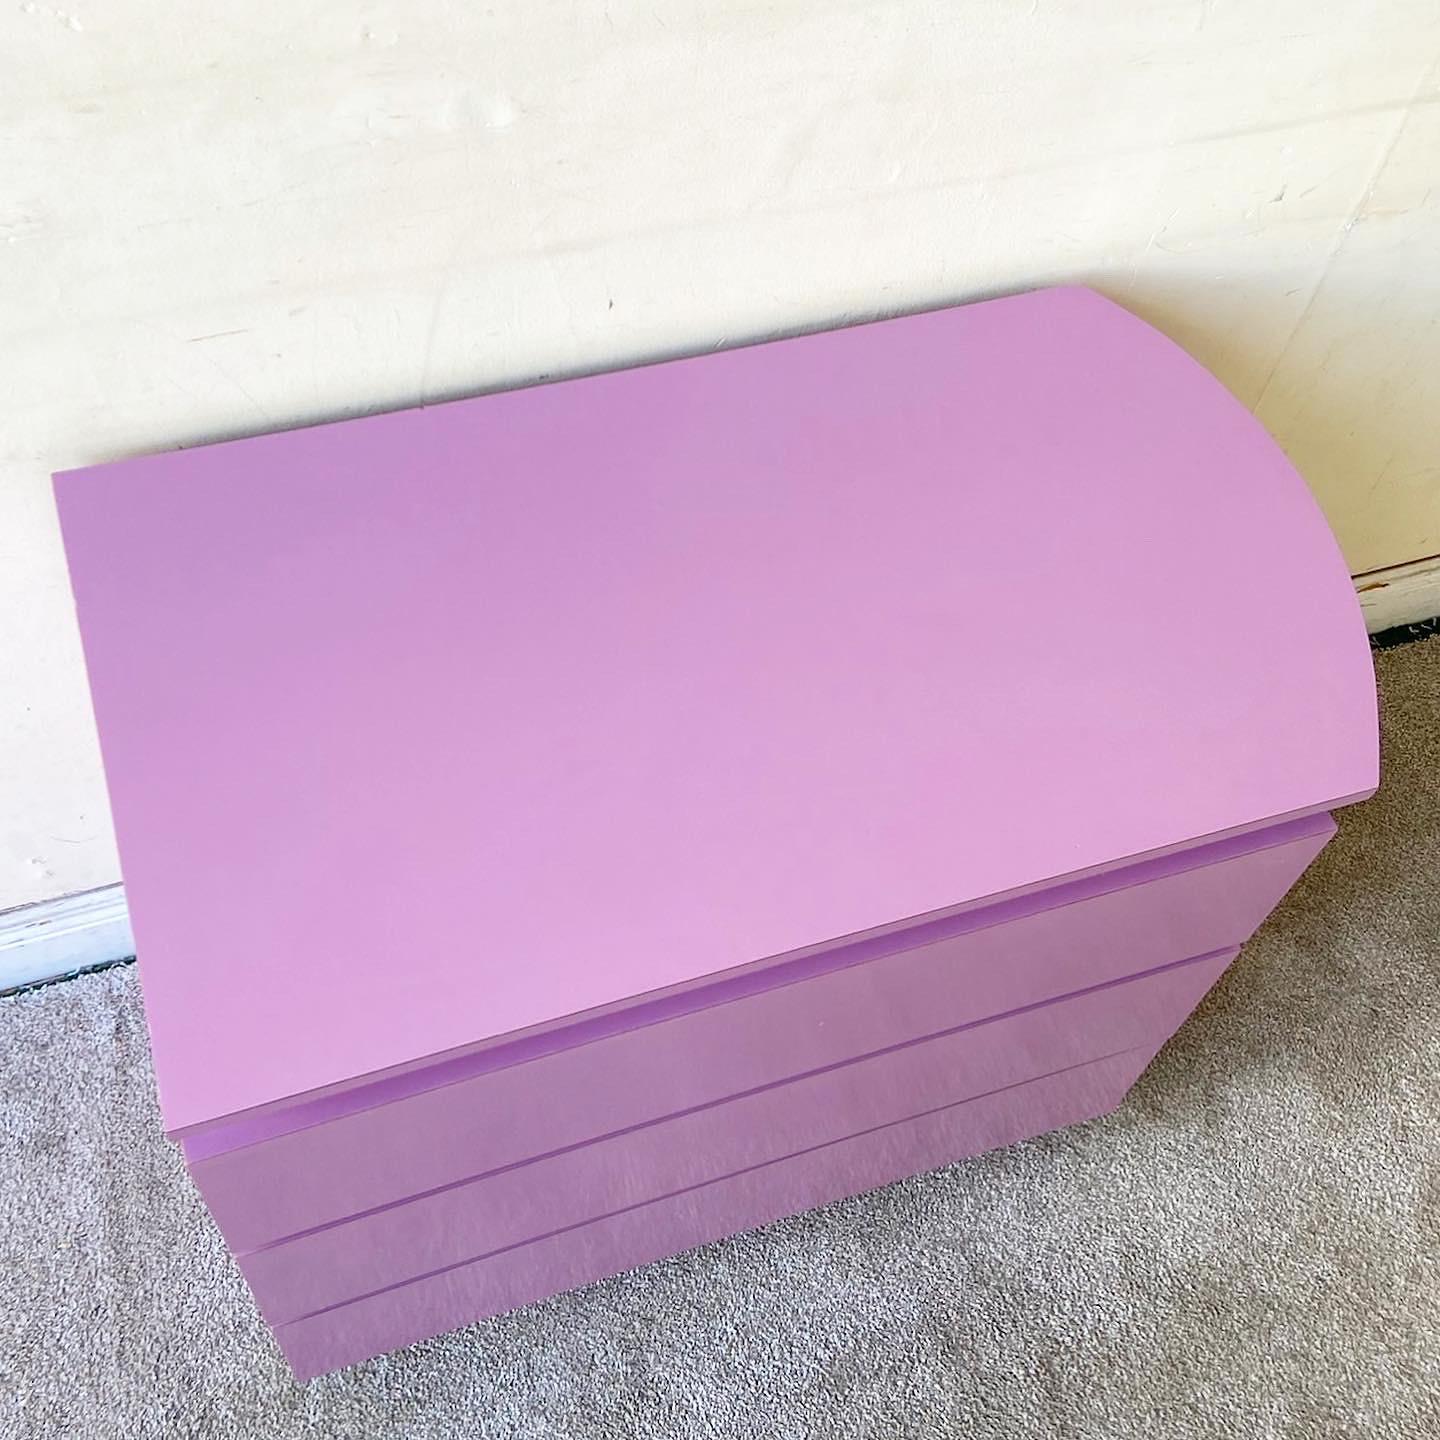 Incredible vintage Postmodern chest of drawers. Features a purple lacquer laminate with three large spacious drawers.
